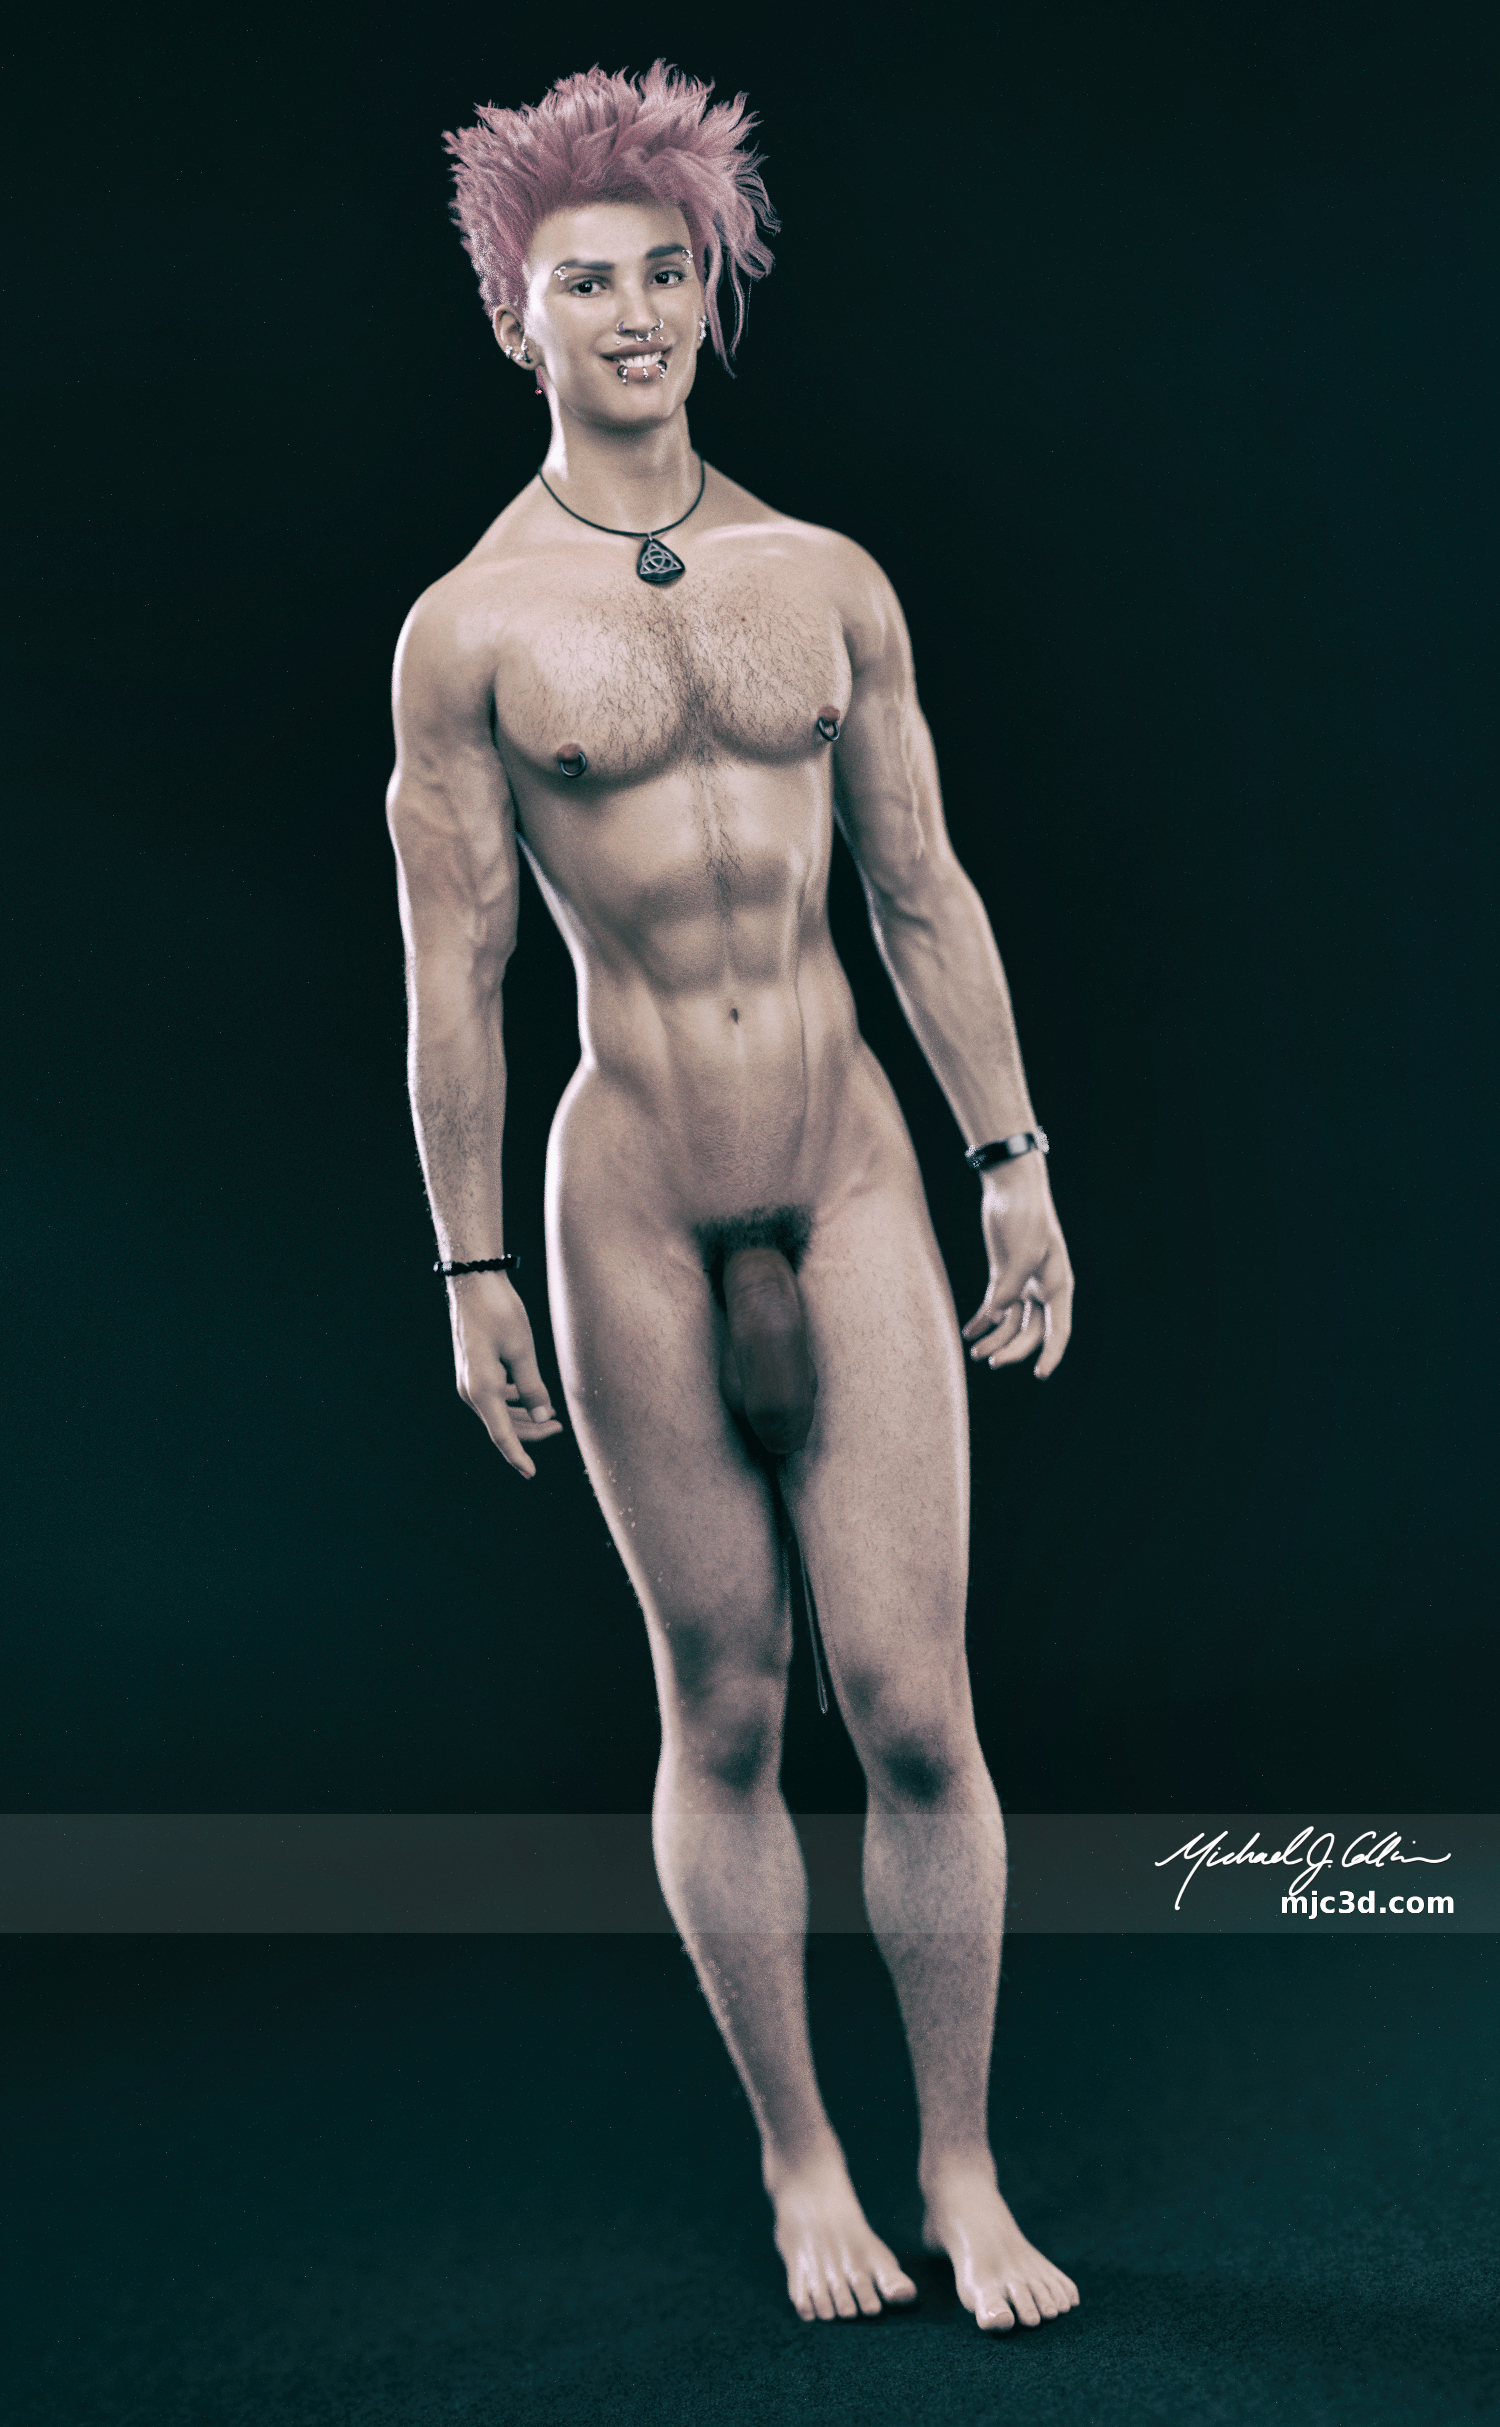 3D digital artwork of a well-built, muscular, nude man with pink spiked-hair sporting a very large, dark, and thick uncircumcised penis that is hanging down from a neatly cropped tuft of hair, and has several face and body piercings, a hairy chest, smooth abs and torso, and hairy arms and legs. He is standing with his arms to his side in a studio against a dark floor and background and is smiling broadly.